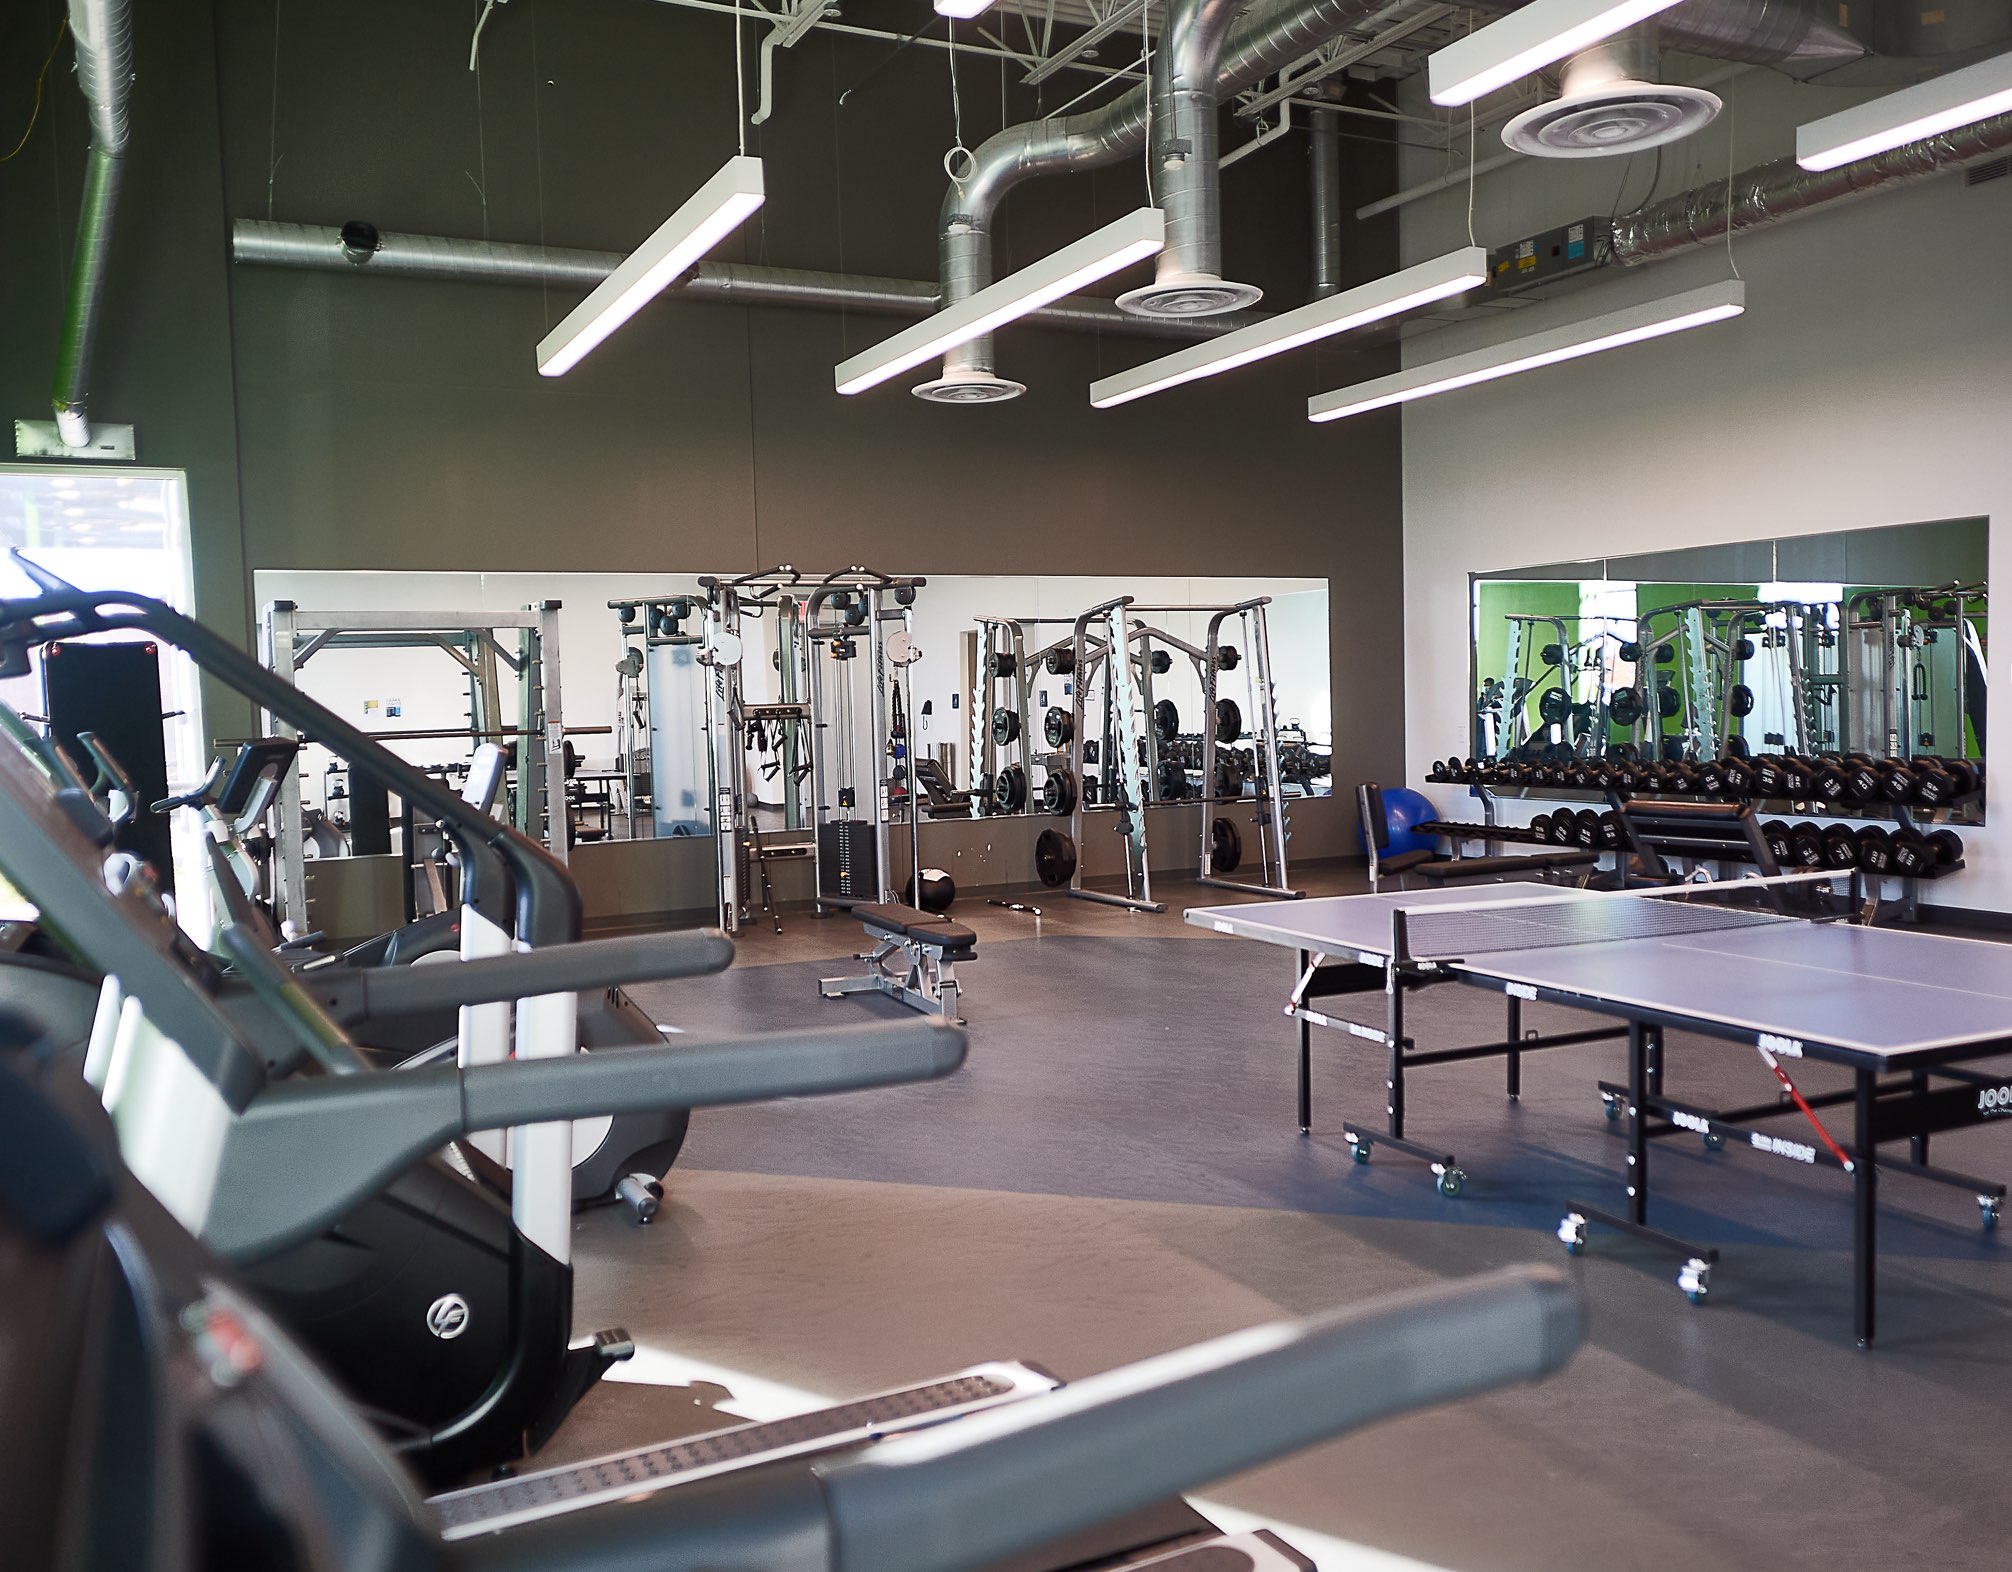 Fitness center at Zonatherm headquarters. We offer amenities such as a wellness room and other features.